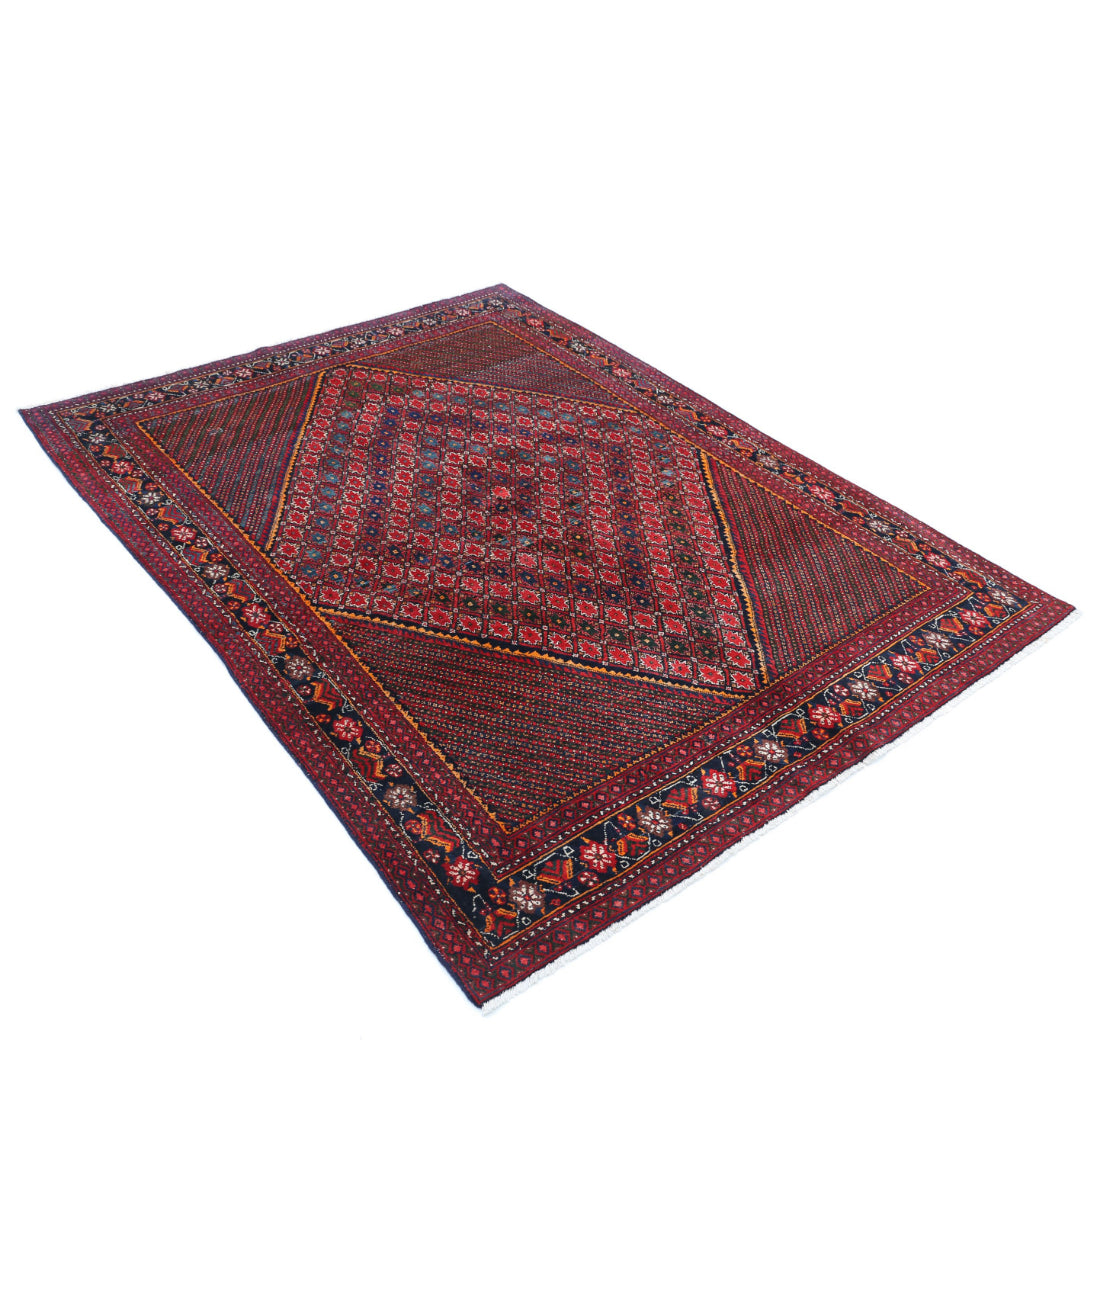 Hand Knotted Persian Josheghan Wool Rug - 5'0'' x 6'7'' 5'0'' x 6'7'' (150 X 198) / Red / Blue